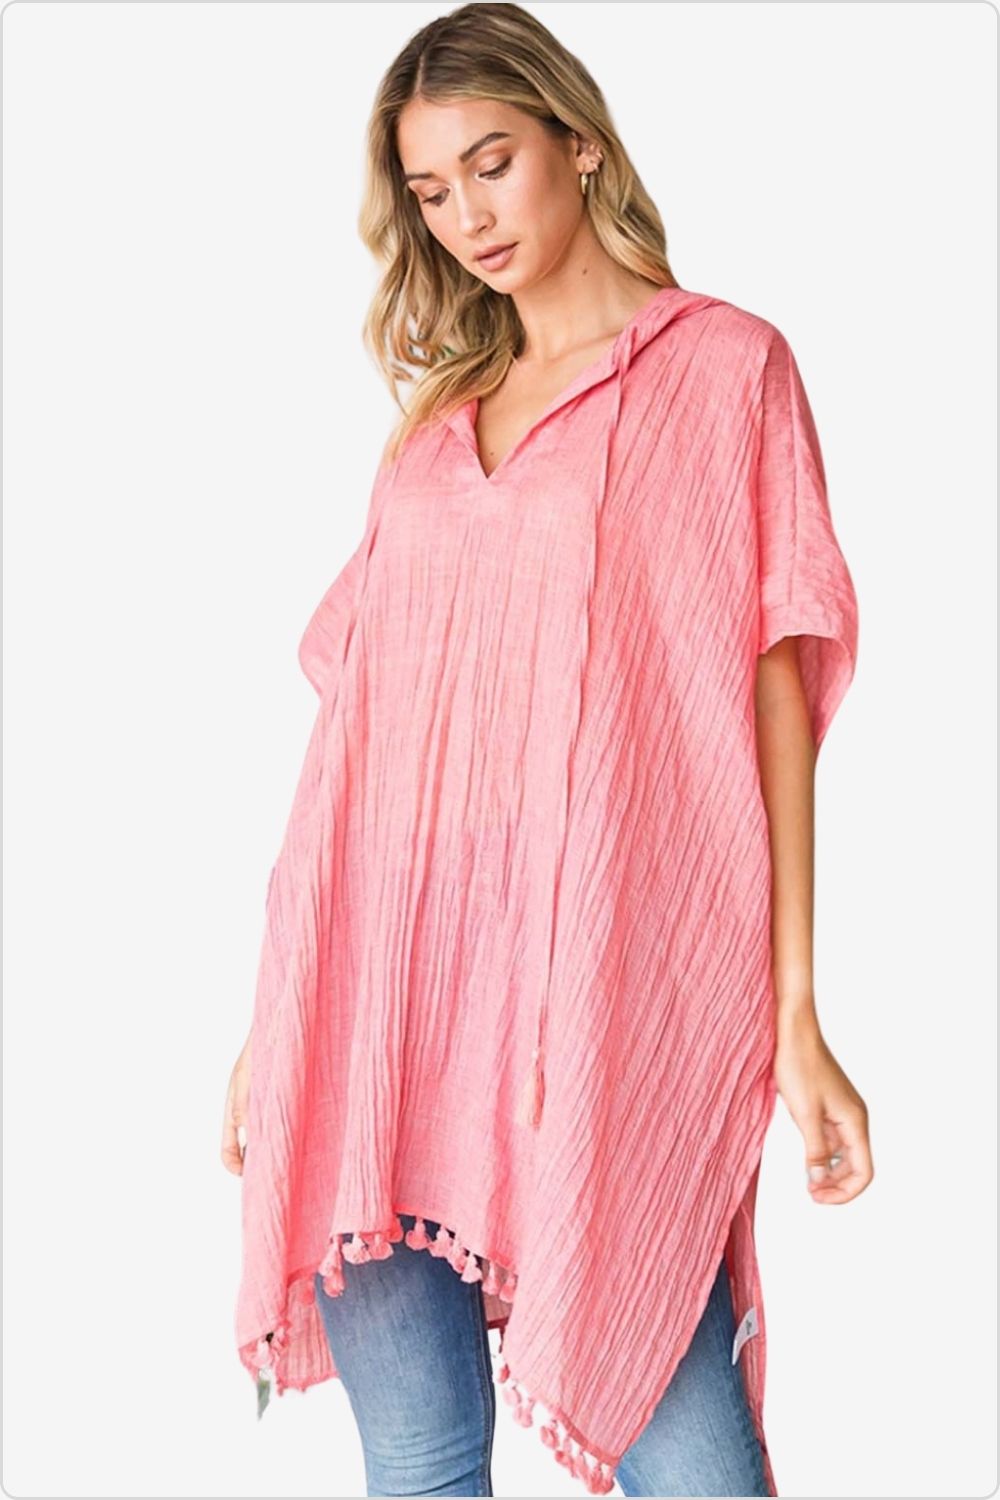 Stylish hooded cover-up with playful tassel hem, perfect for beach fashion, Color Light Coral